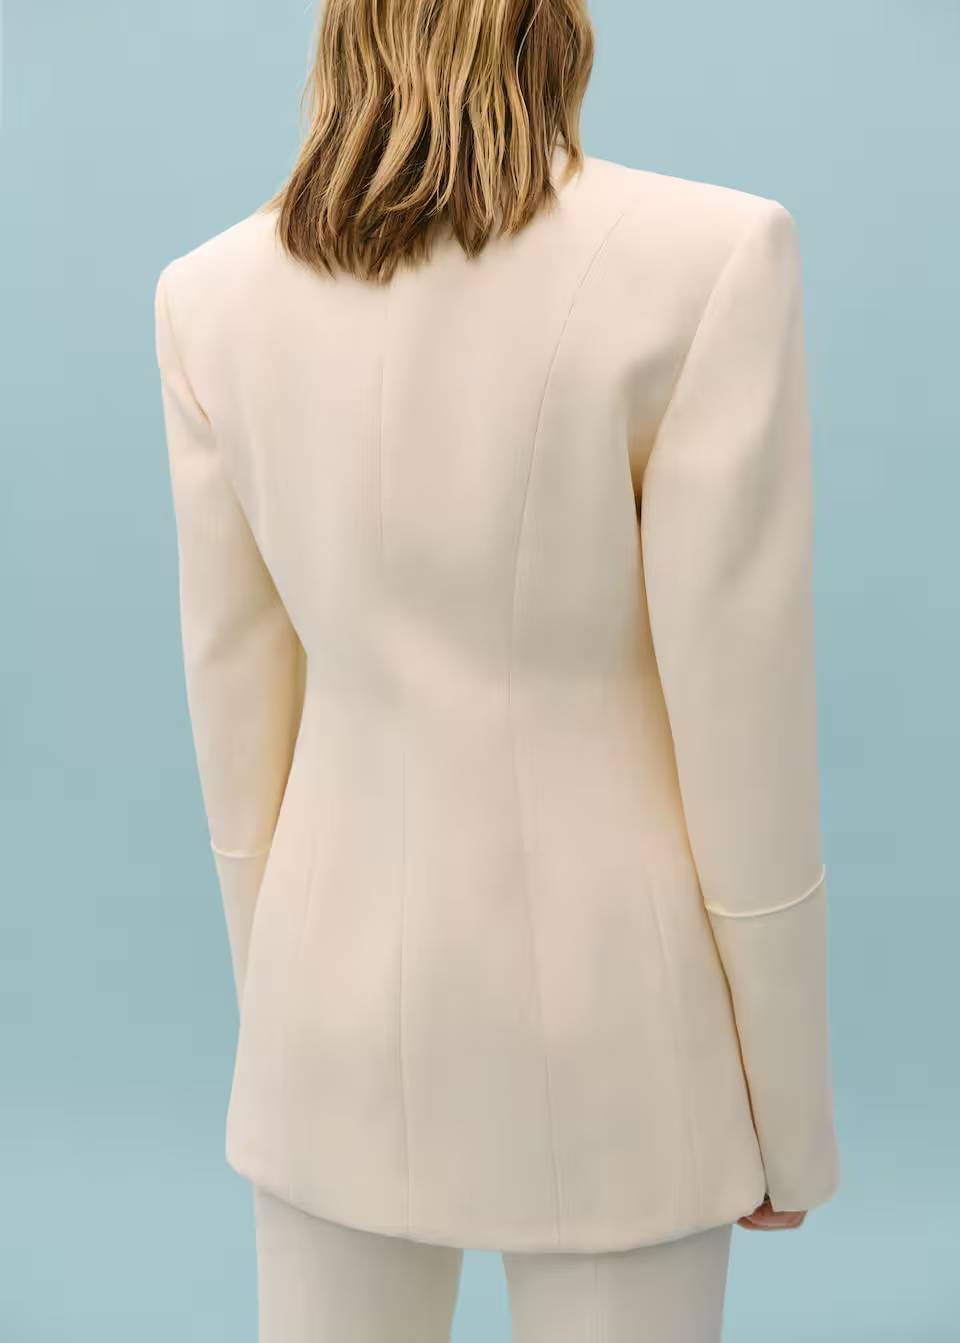 back of a person wearing a white dress